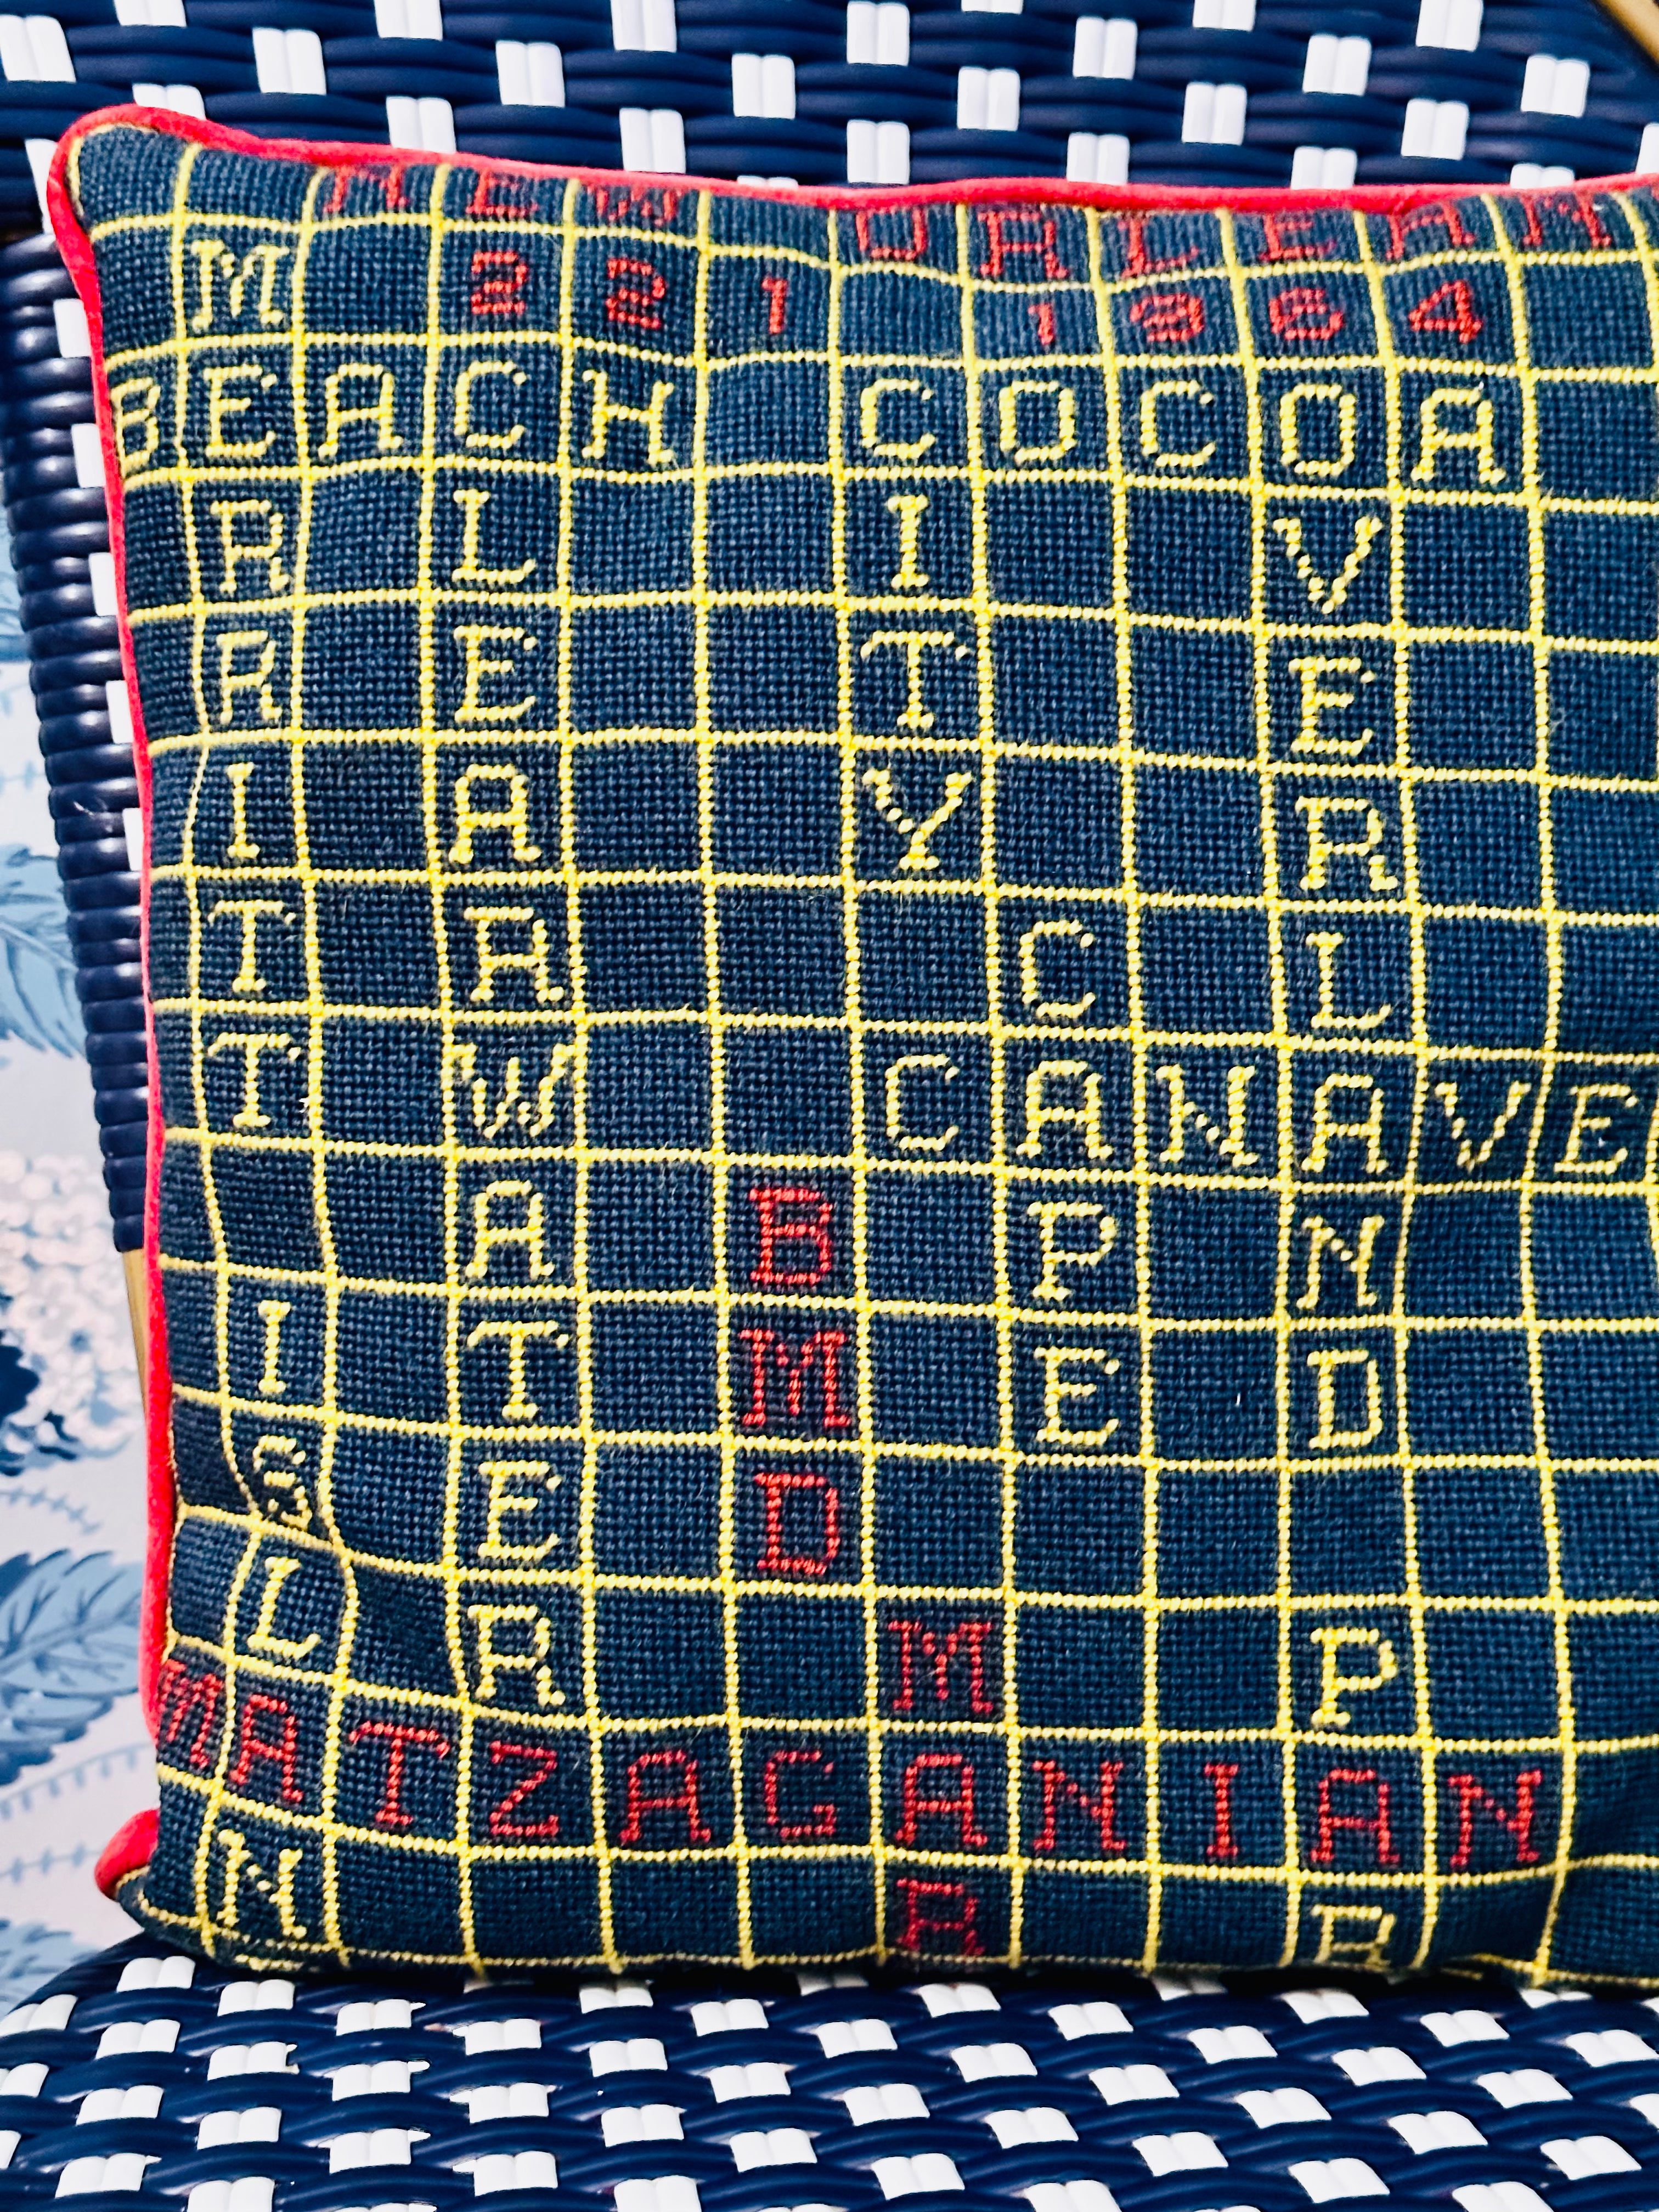 Amazingly Unique Needlepoint Featuring Southern Cities